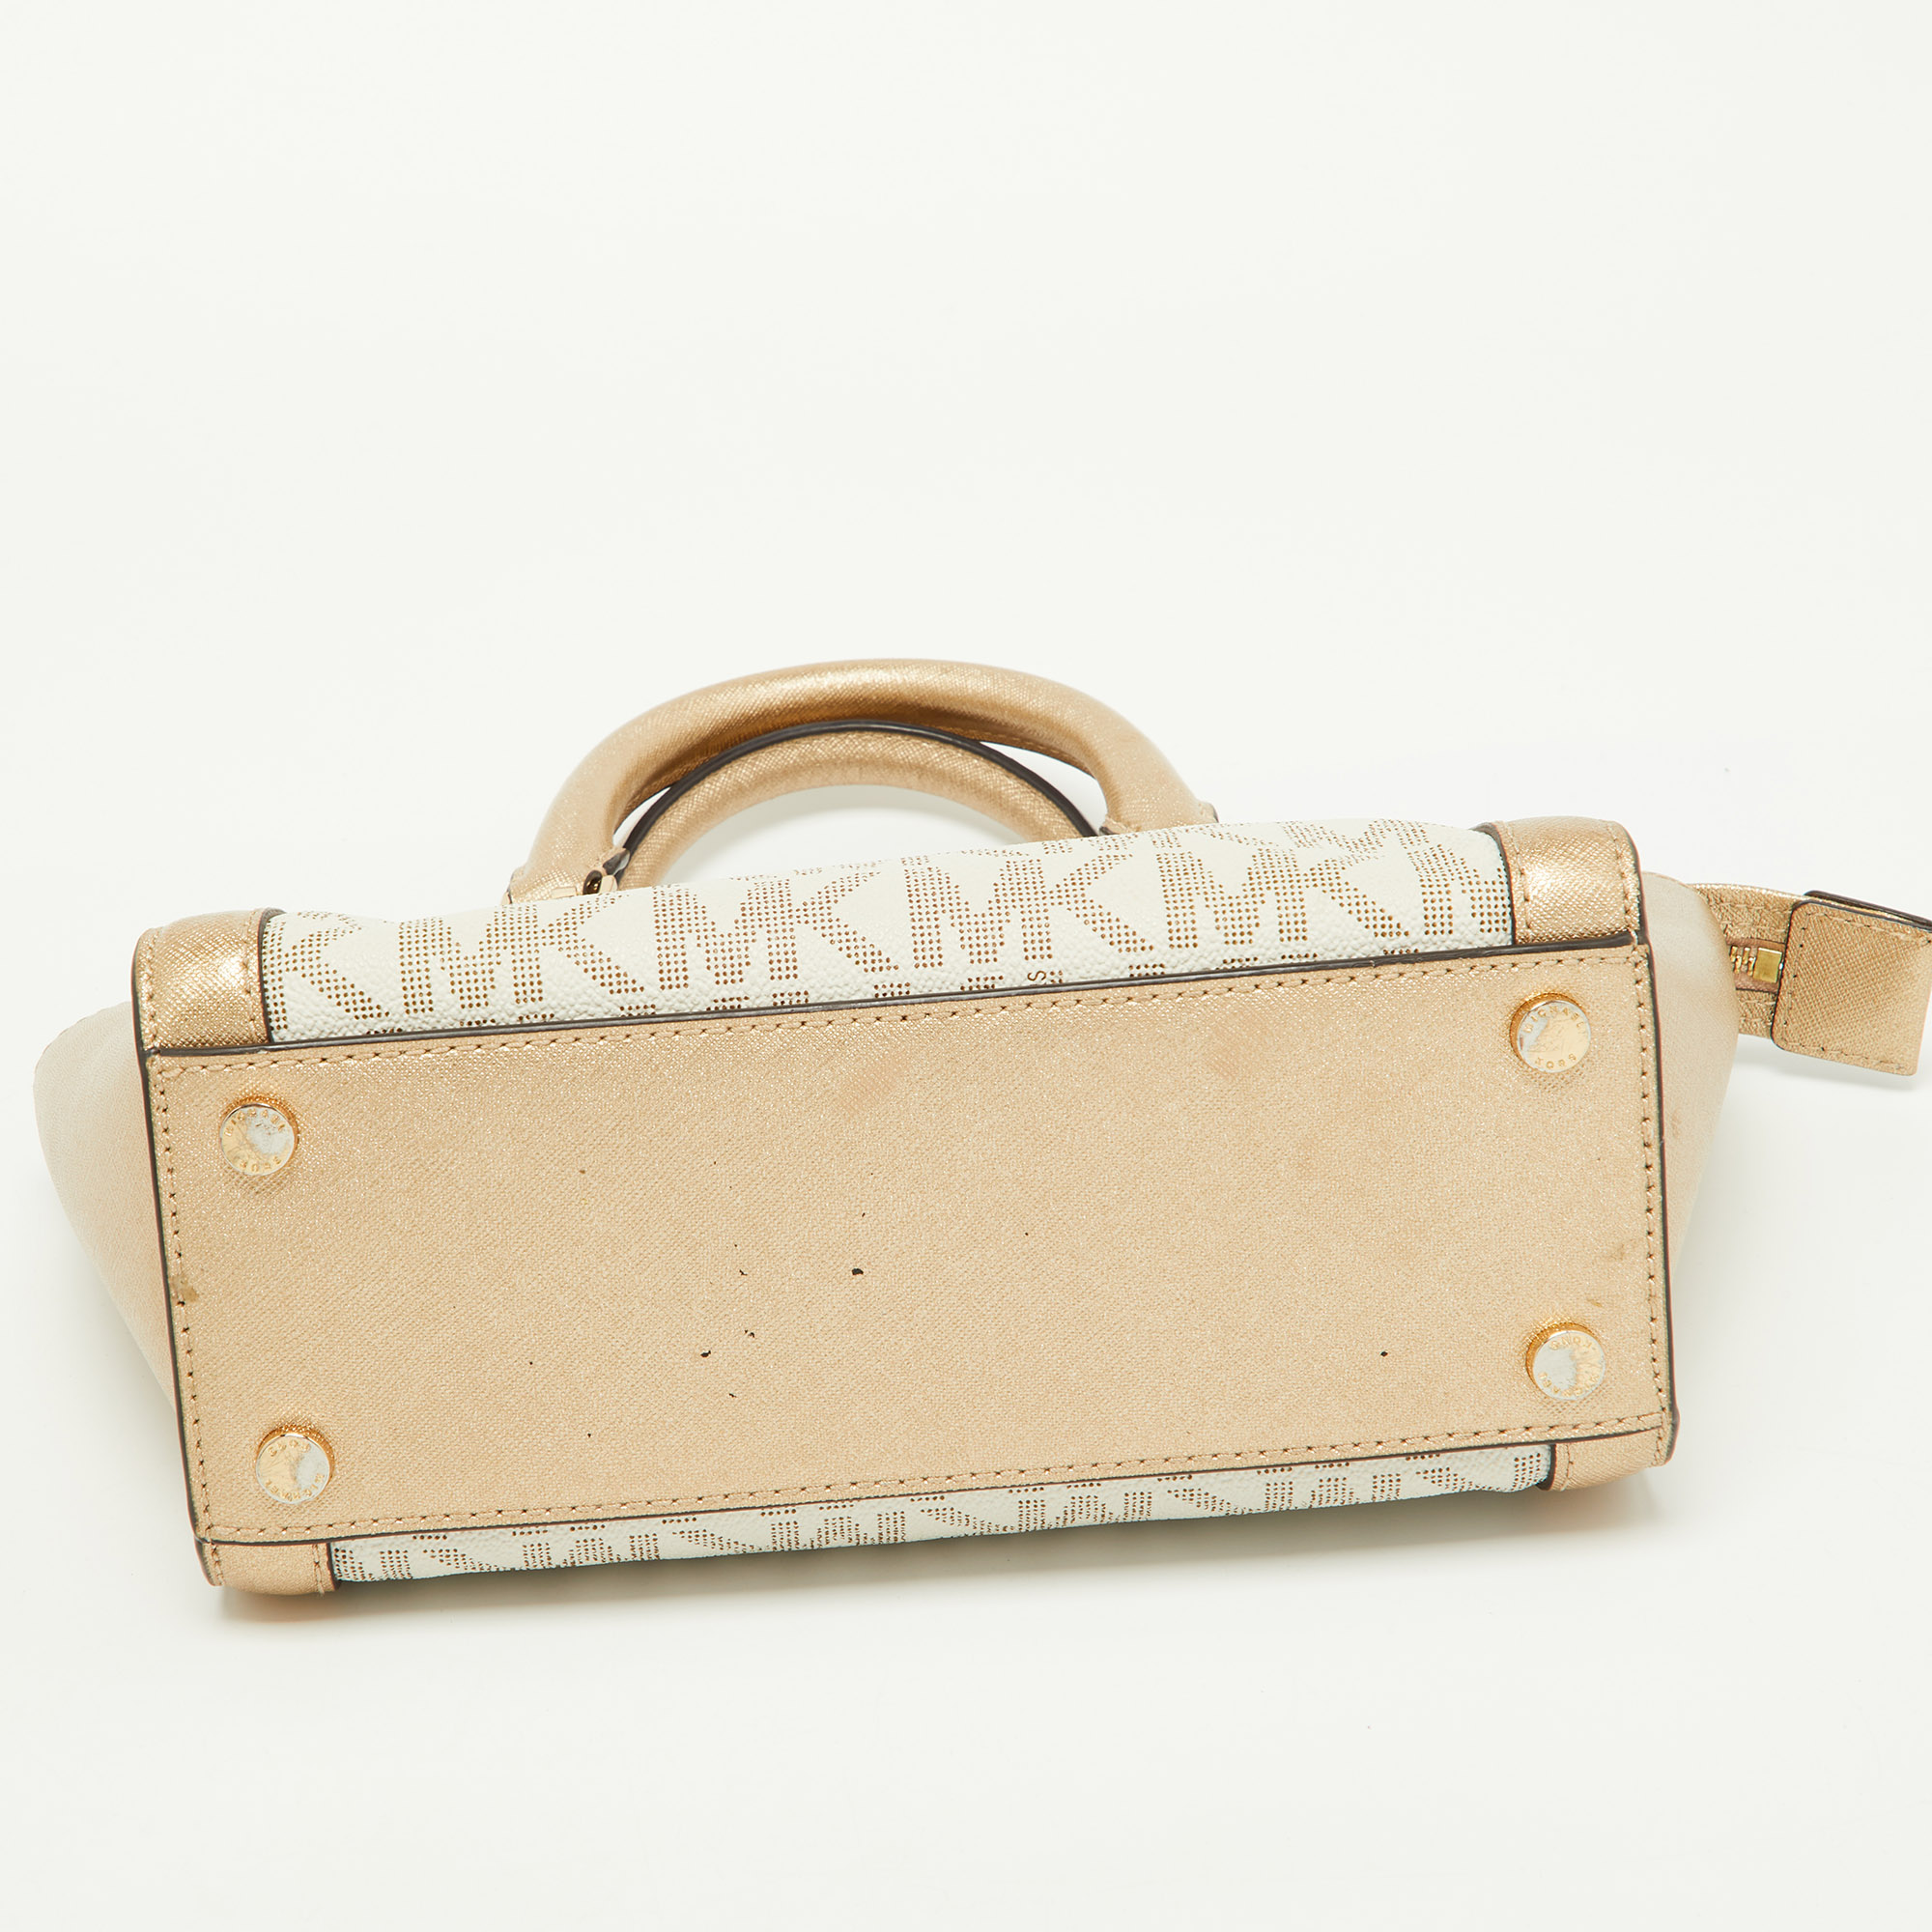 MICHAEL Michael Kors Ivory/Gold Signature Coated Canvas And Leather Tina Satchel